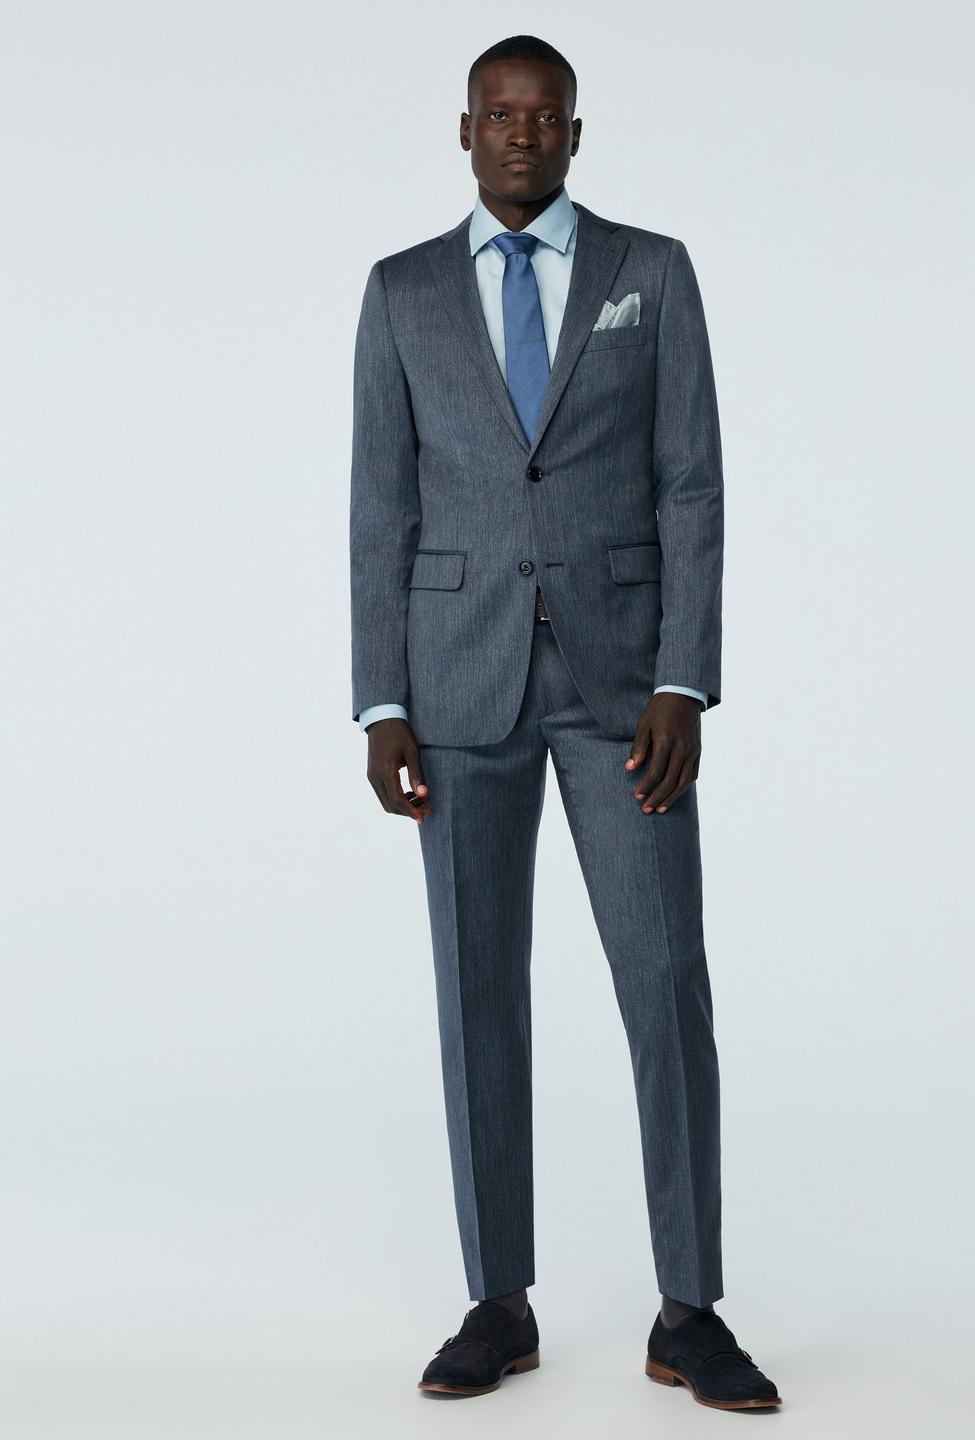 Blue blazer - Solid Design from Indochino Collection